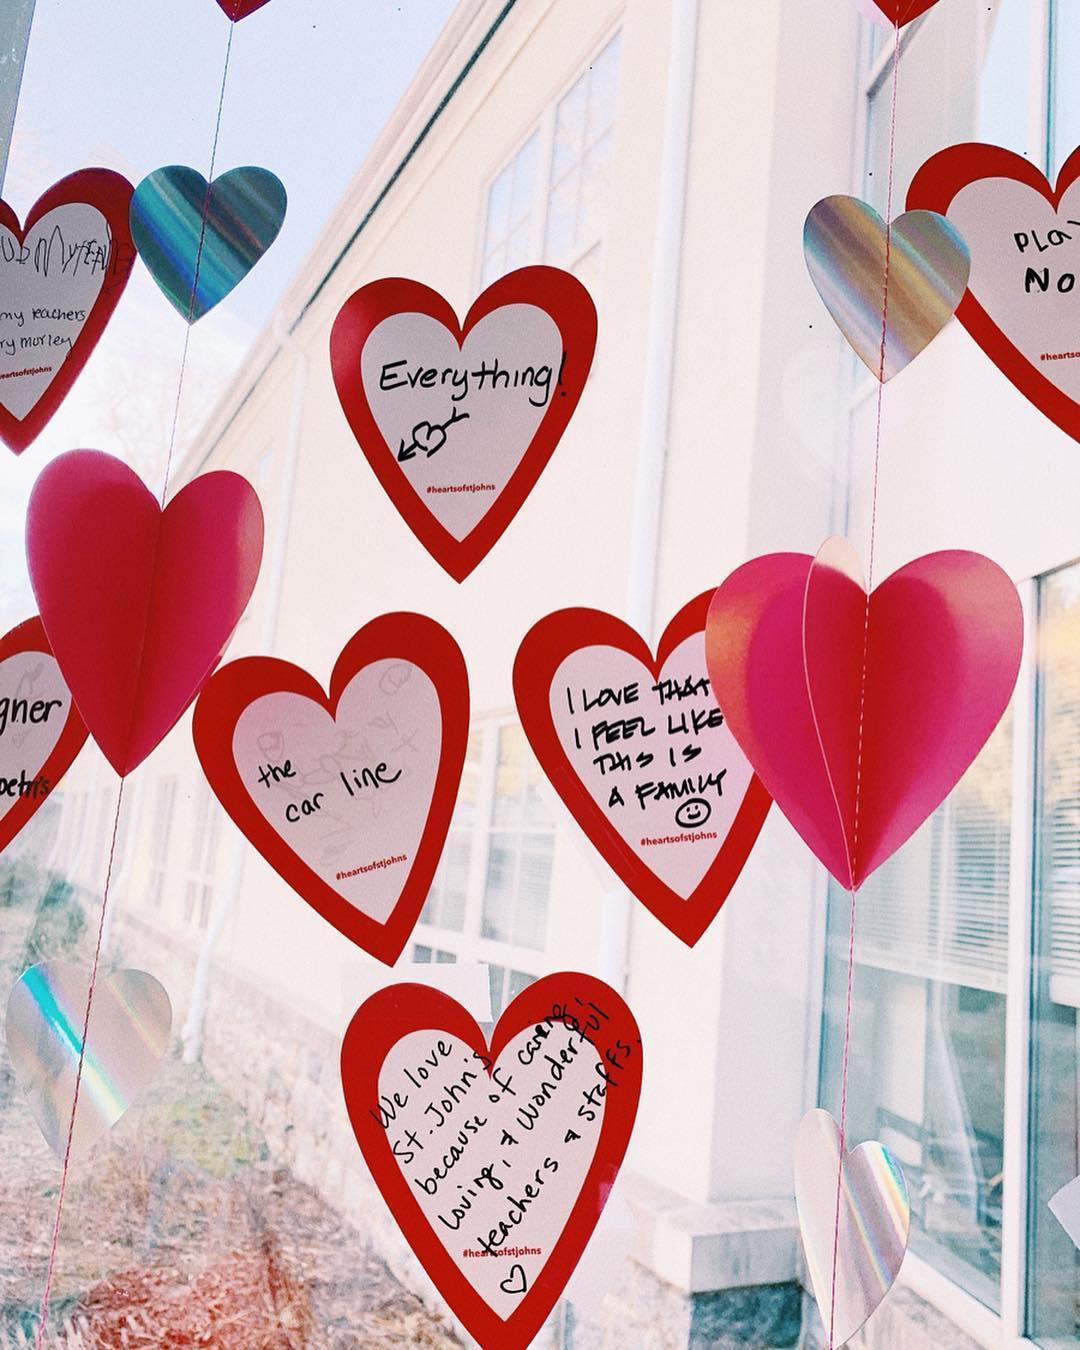 Paper hearts taped on a window with comments about what people love about St. John's